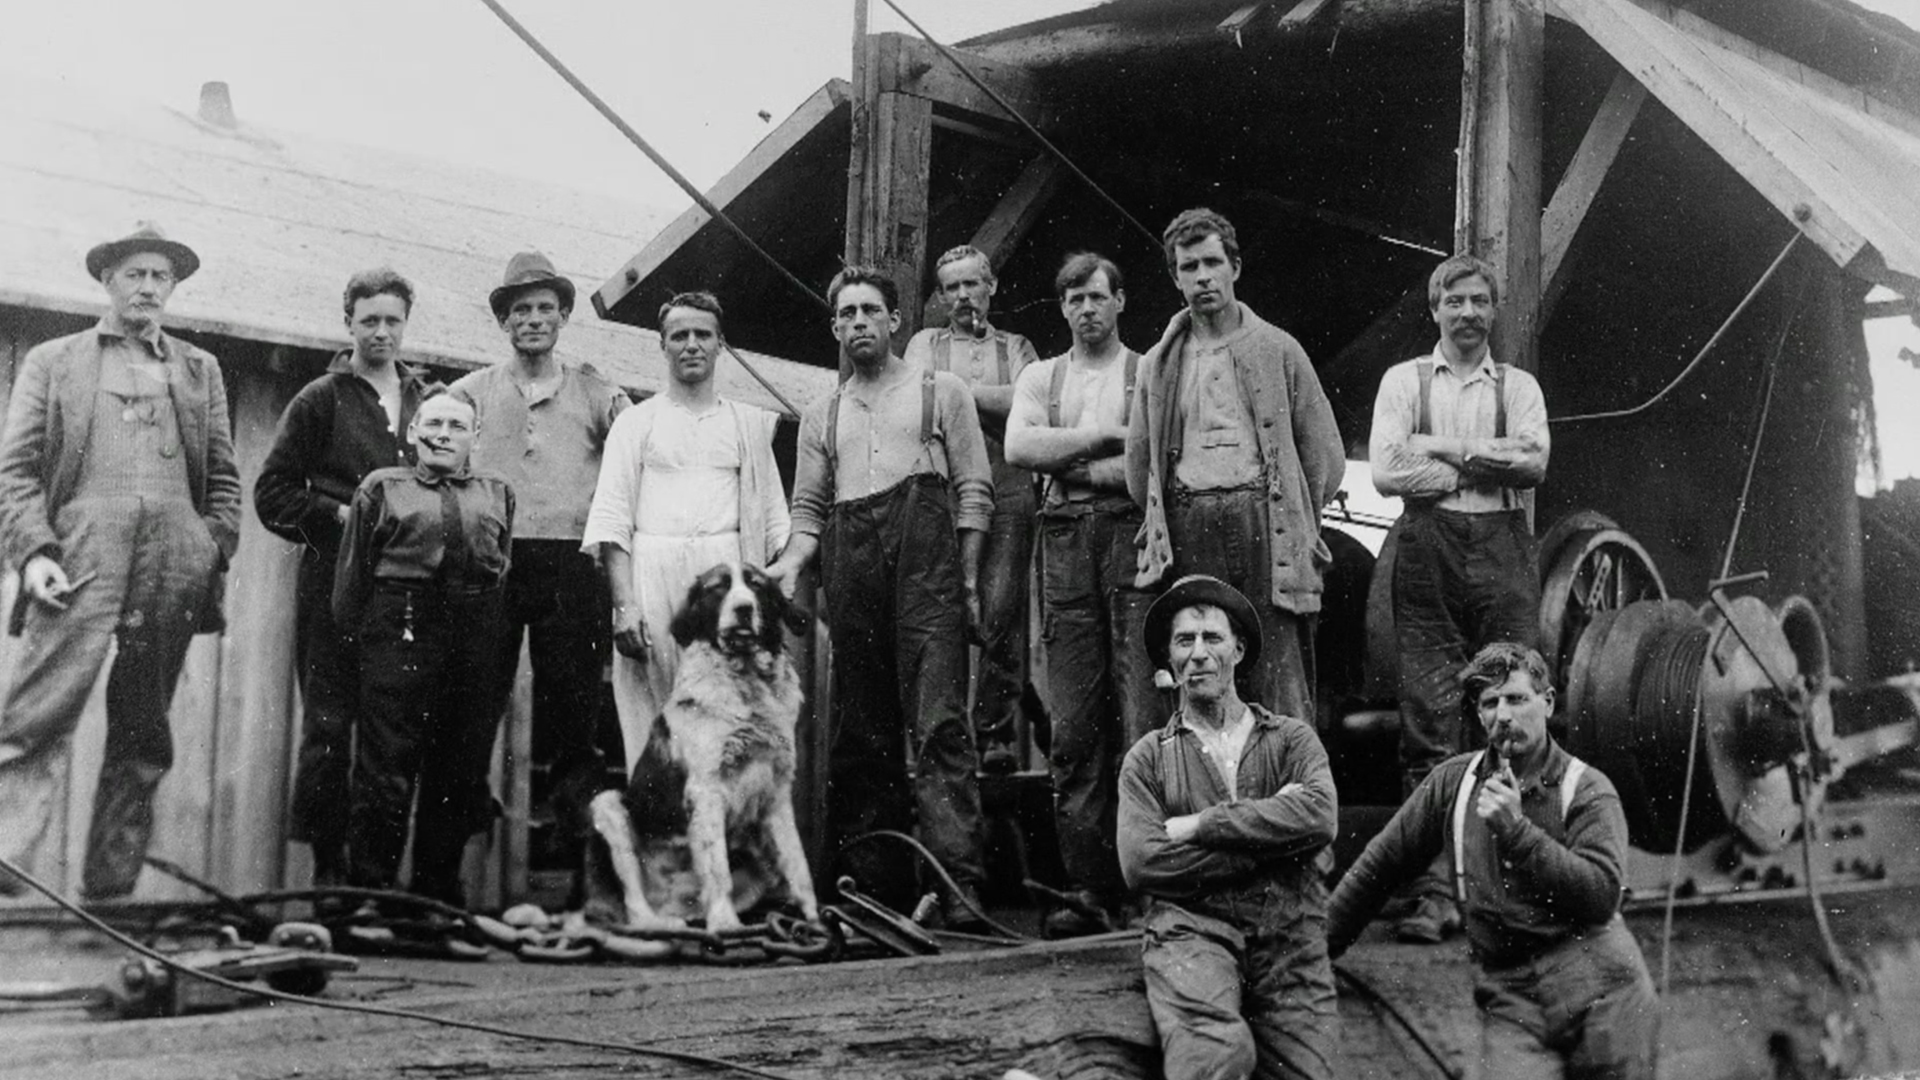 Working People: A History of Labour in British Columbia - E18 - Wilmer Gold